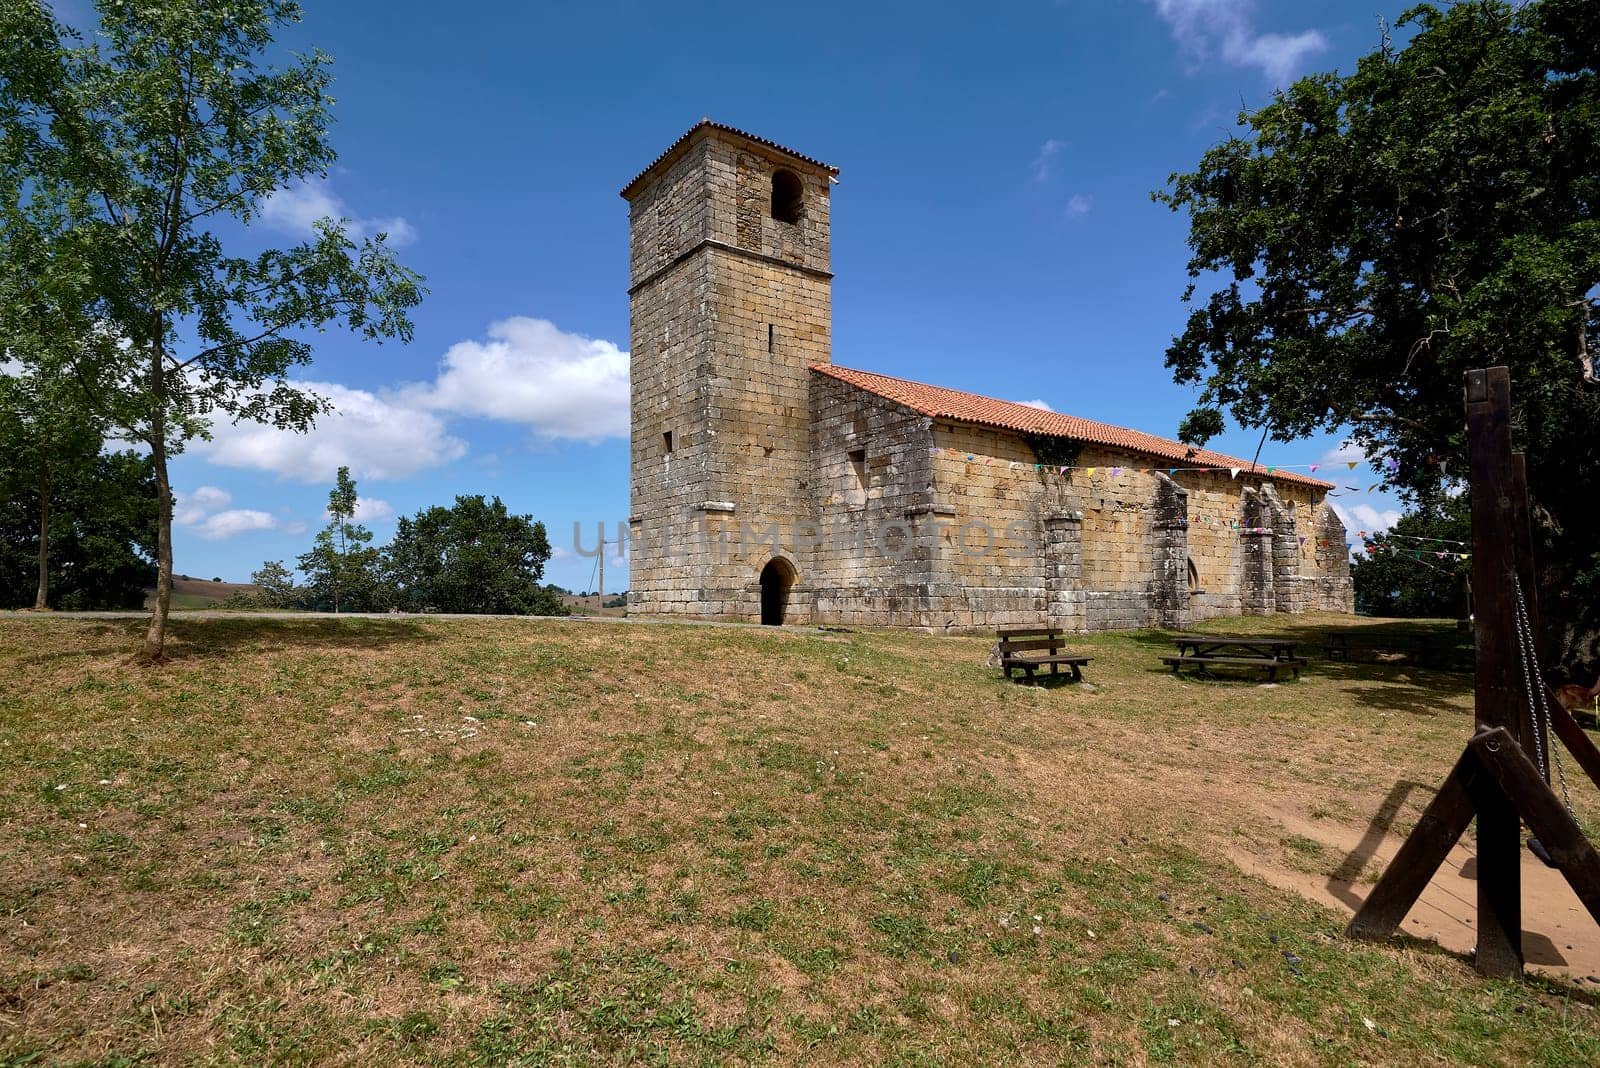 Church of San Pantaleon or San Sebastian in Lierganes on a bright summer day.Romanesque, tower, masonry, stone, vegetation, light, luminous, blue sky with clouds